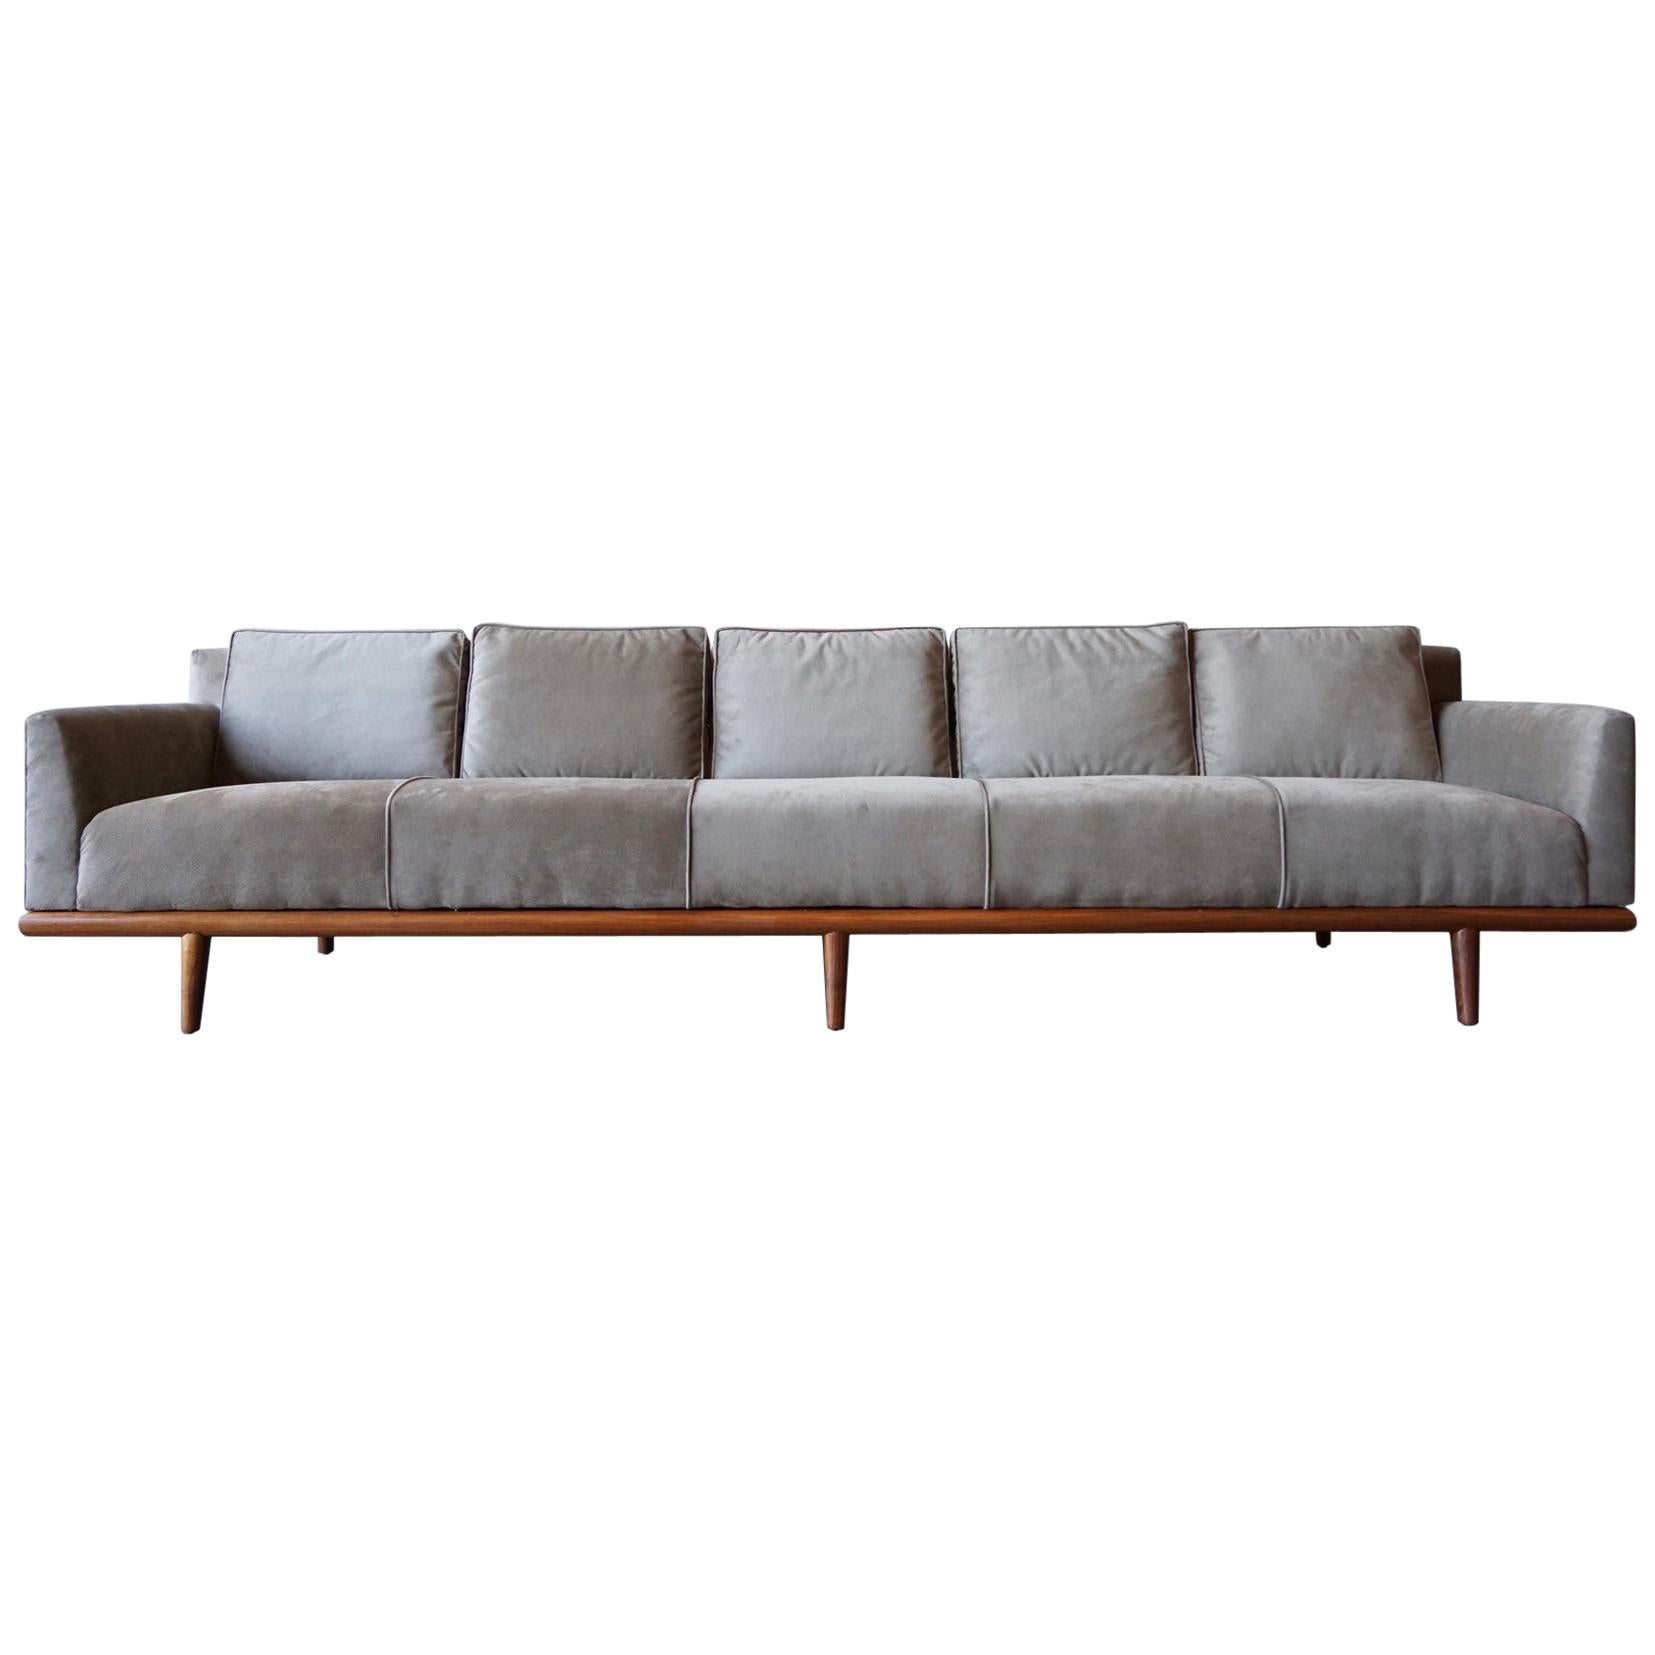 Long and Low Monteverdi-Young Sofa in Warm Grey